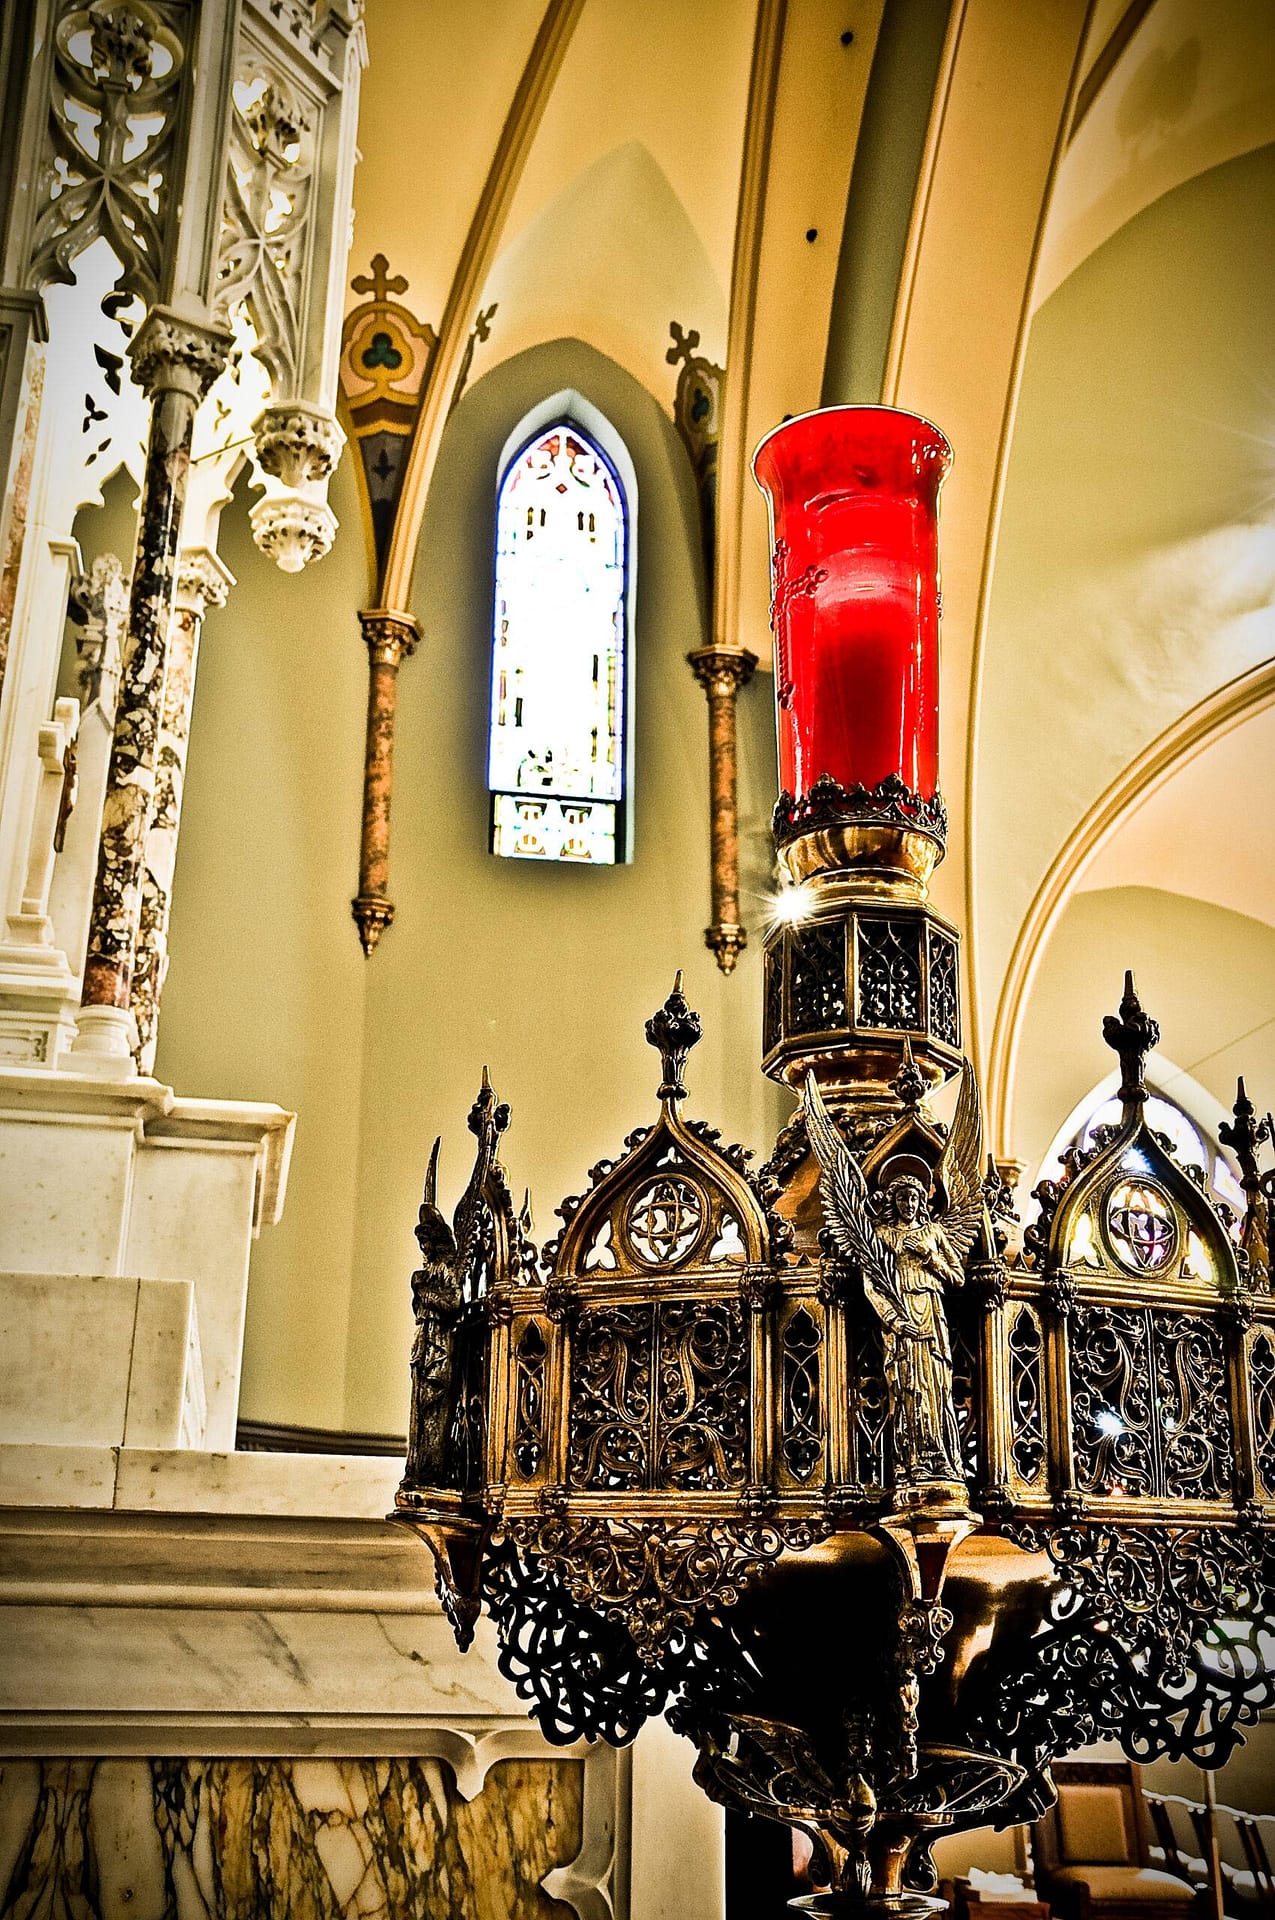 What Does the Red Candle Mean in a Catholic Church 